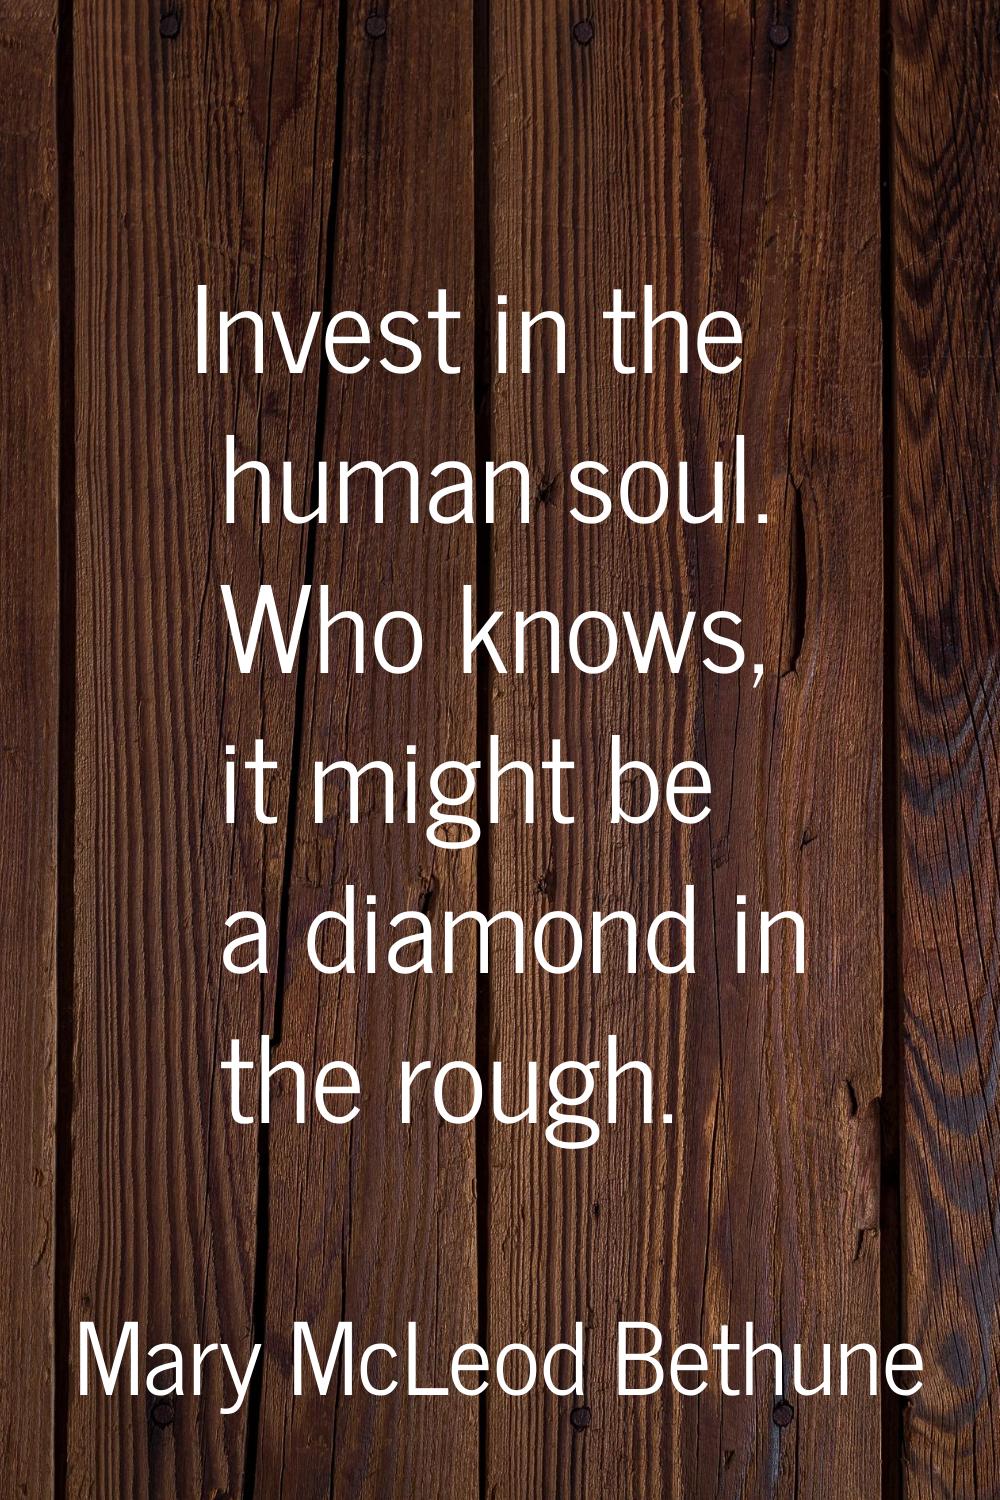 Invest in the human soul. Who knows, it might be a diamond in the rough.